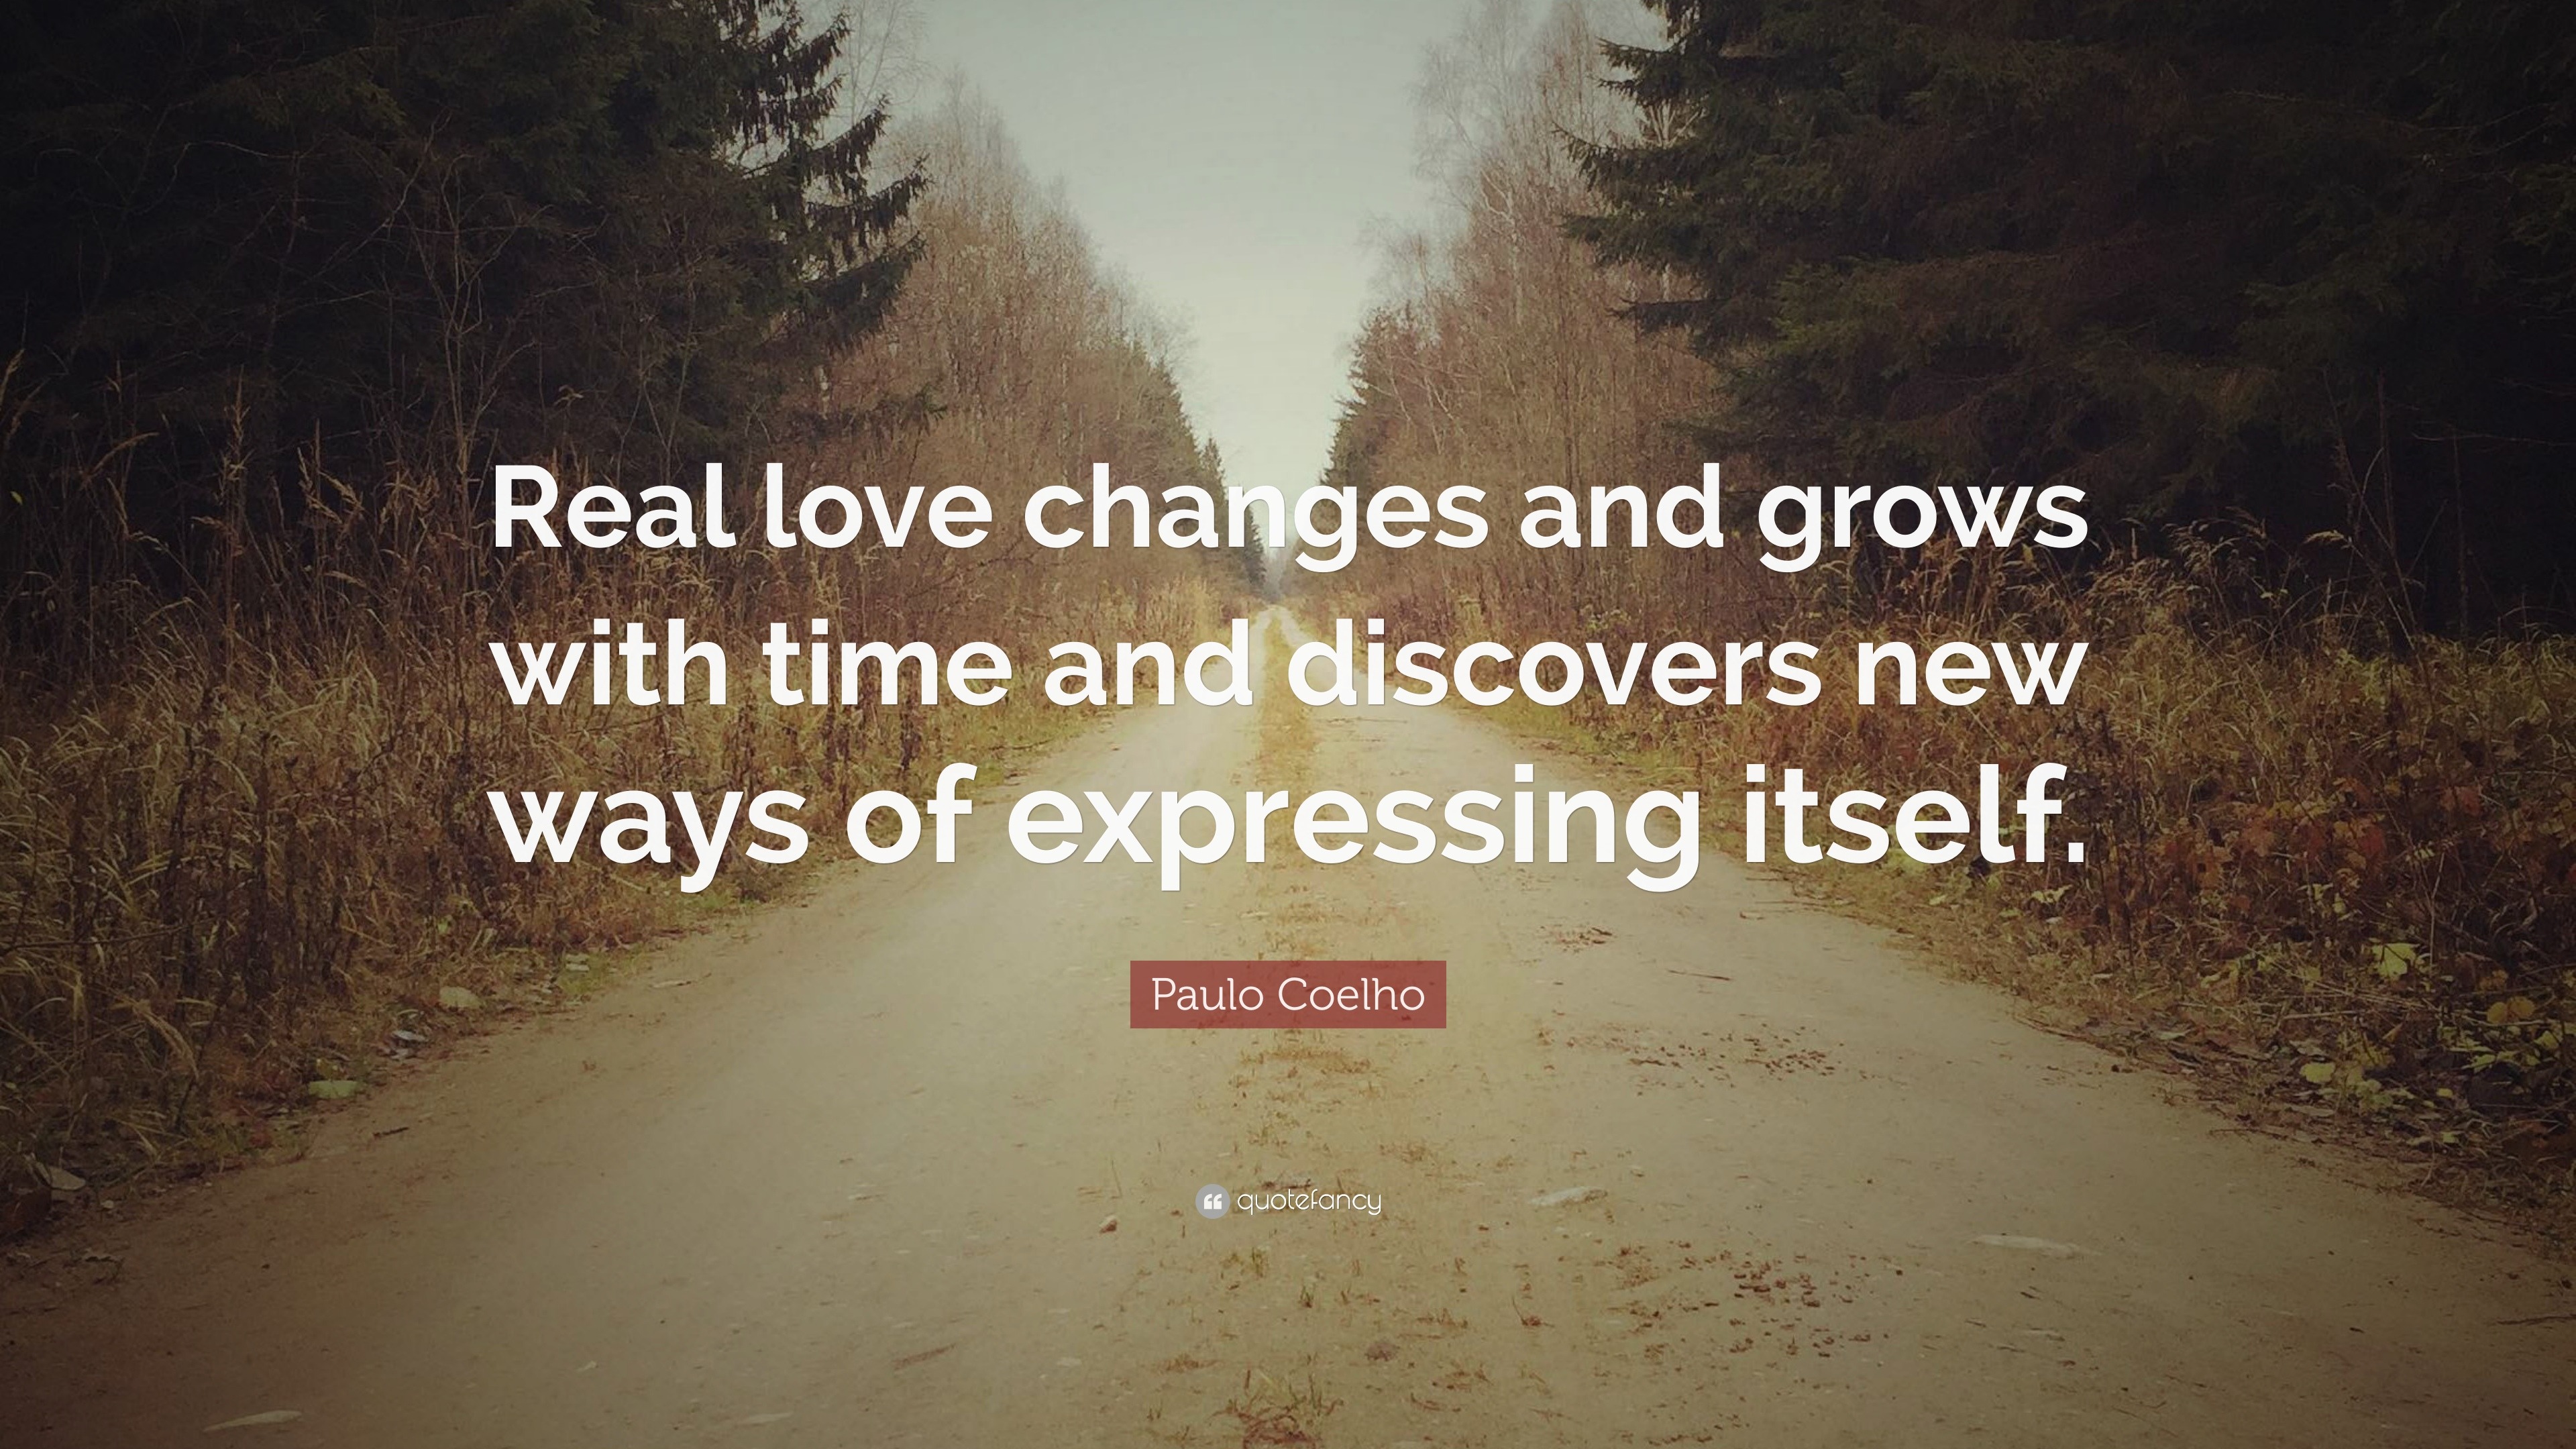 Paulo Coelho Quote “Real love changes and grows with time and discovers new ways